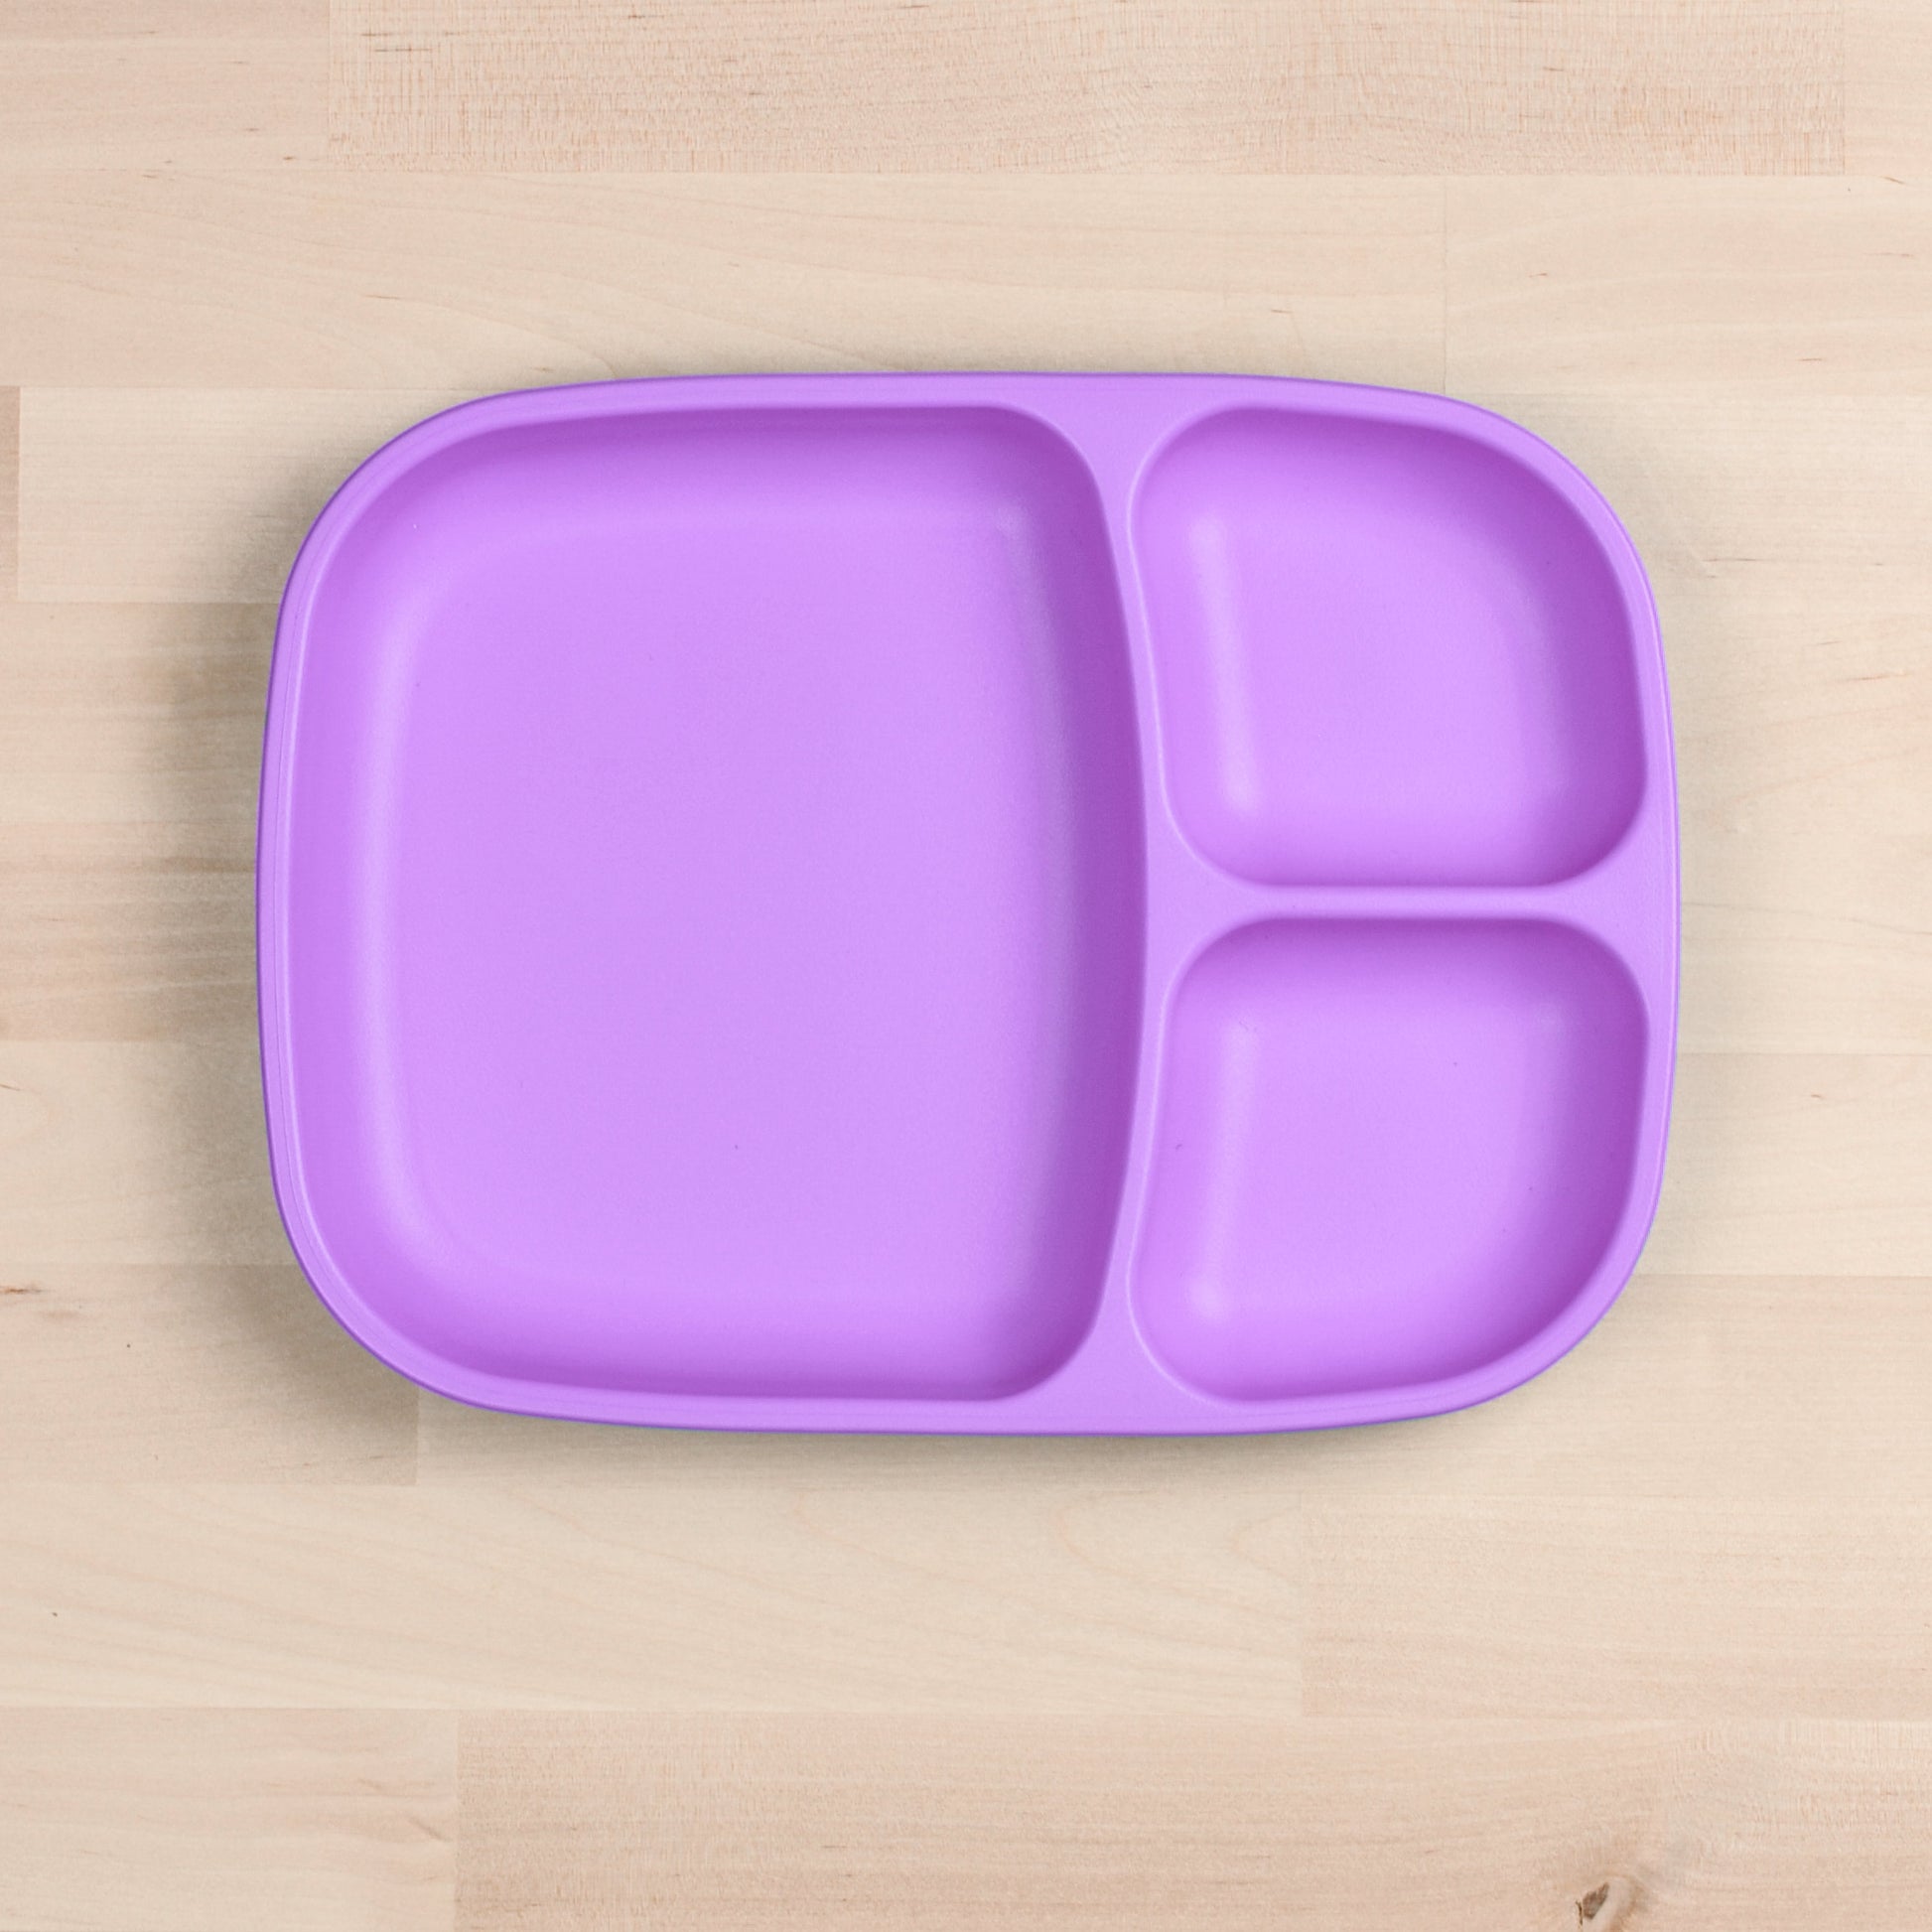 Re-Play Divided Tray in Purple from Bear & Moo